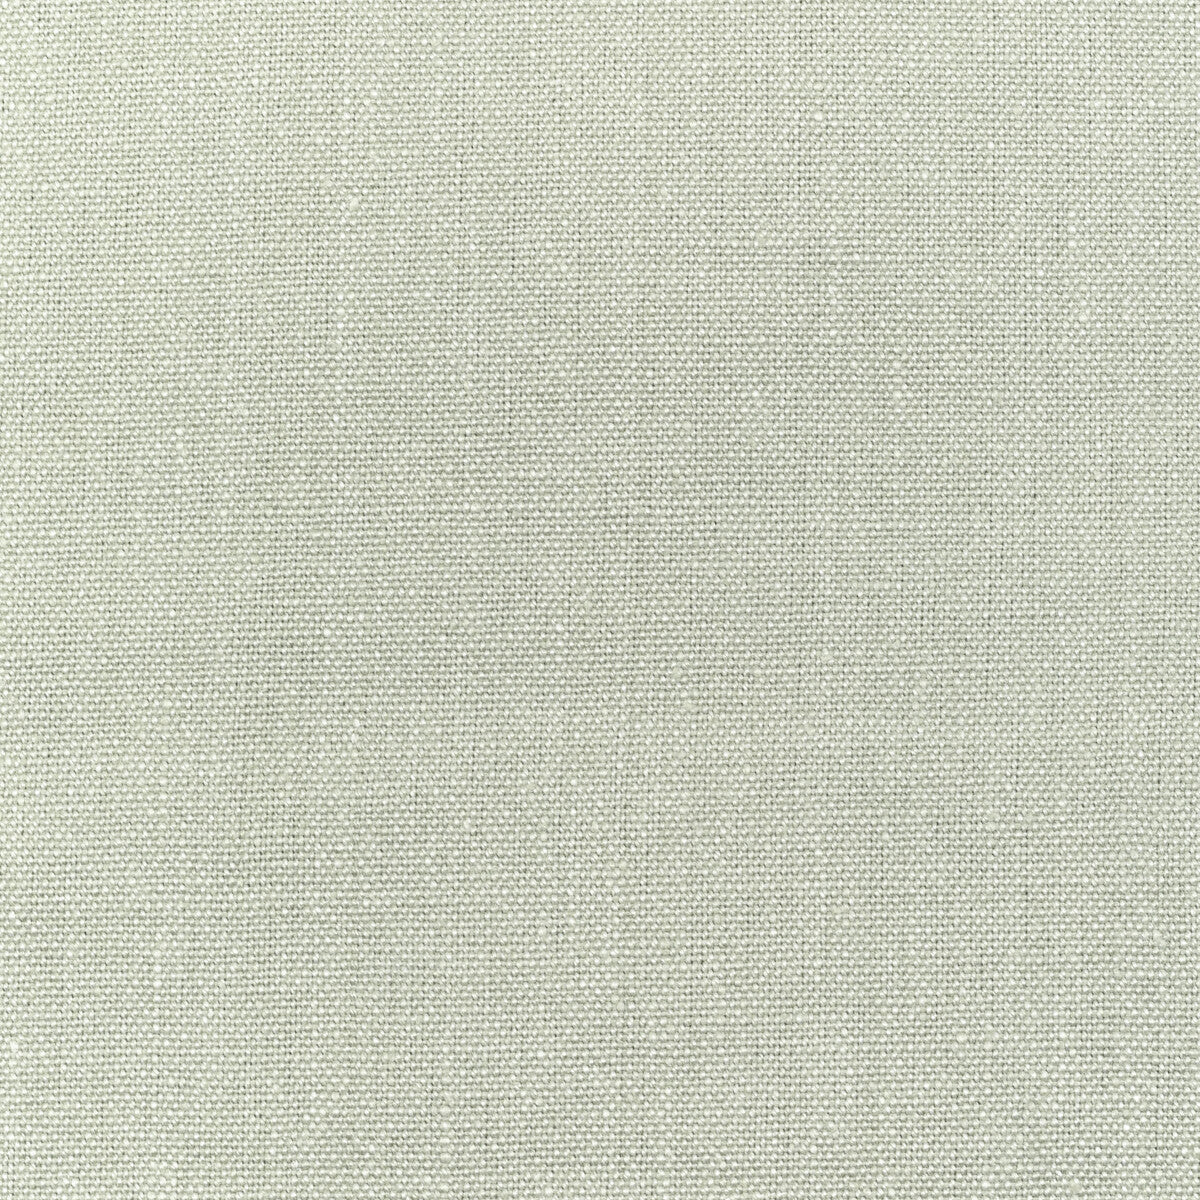 Watermill fabric in sky color - pattern 30421.115.0 - by Kravet Basics in the Perfect Plains collection